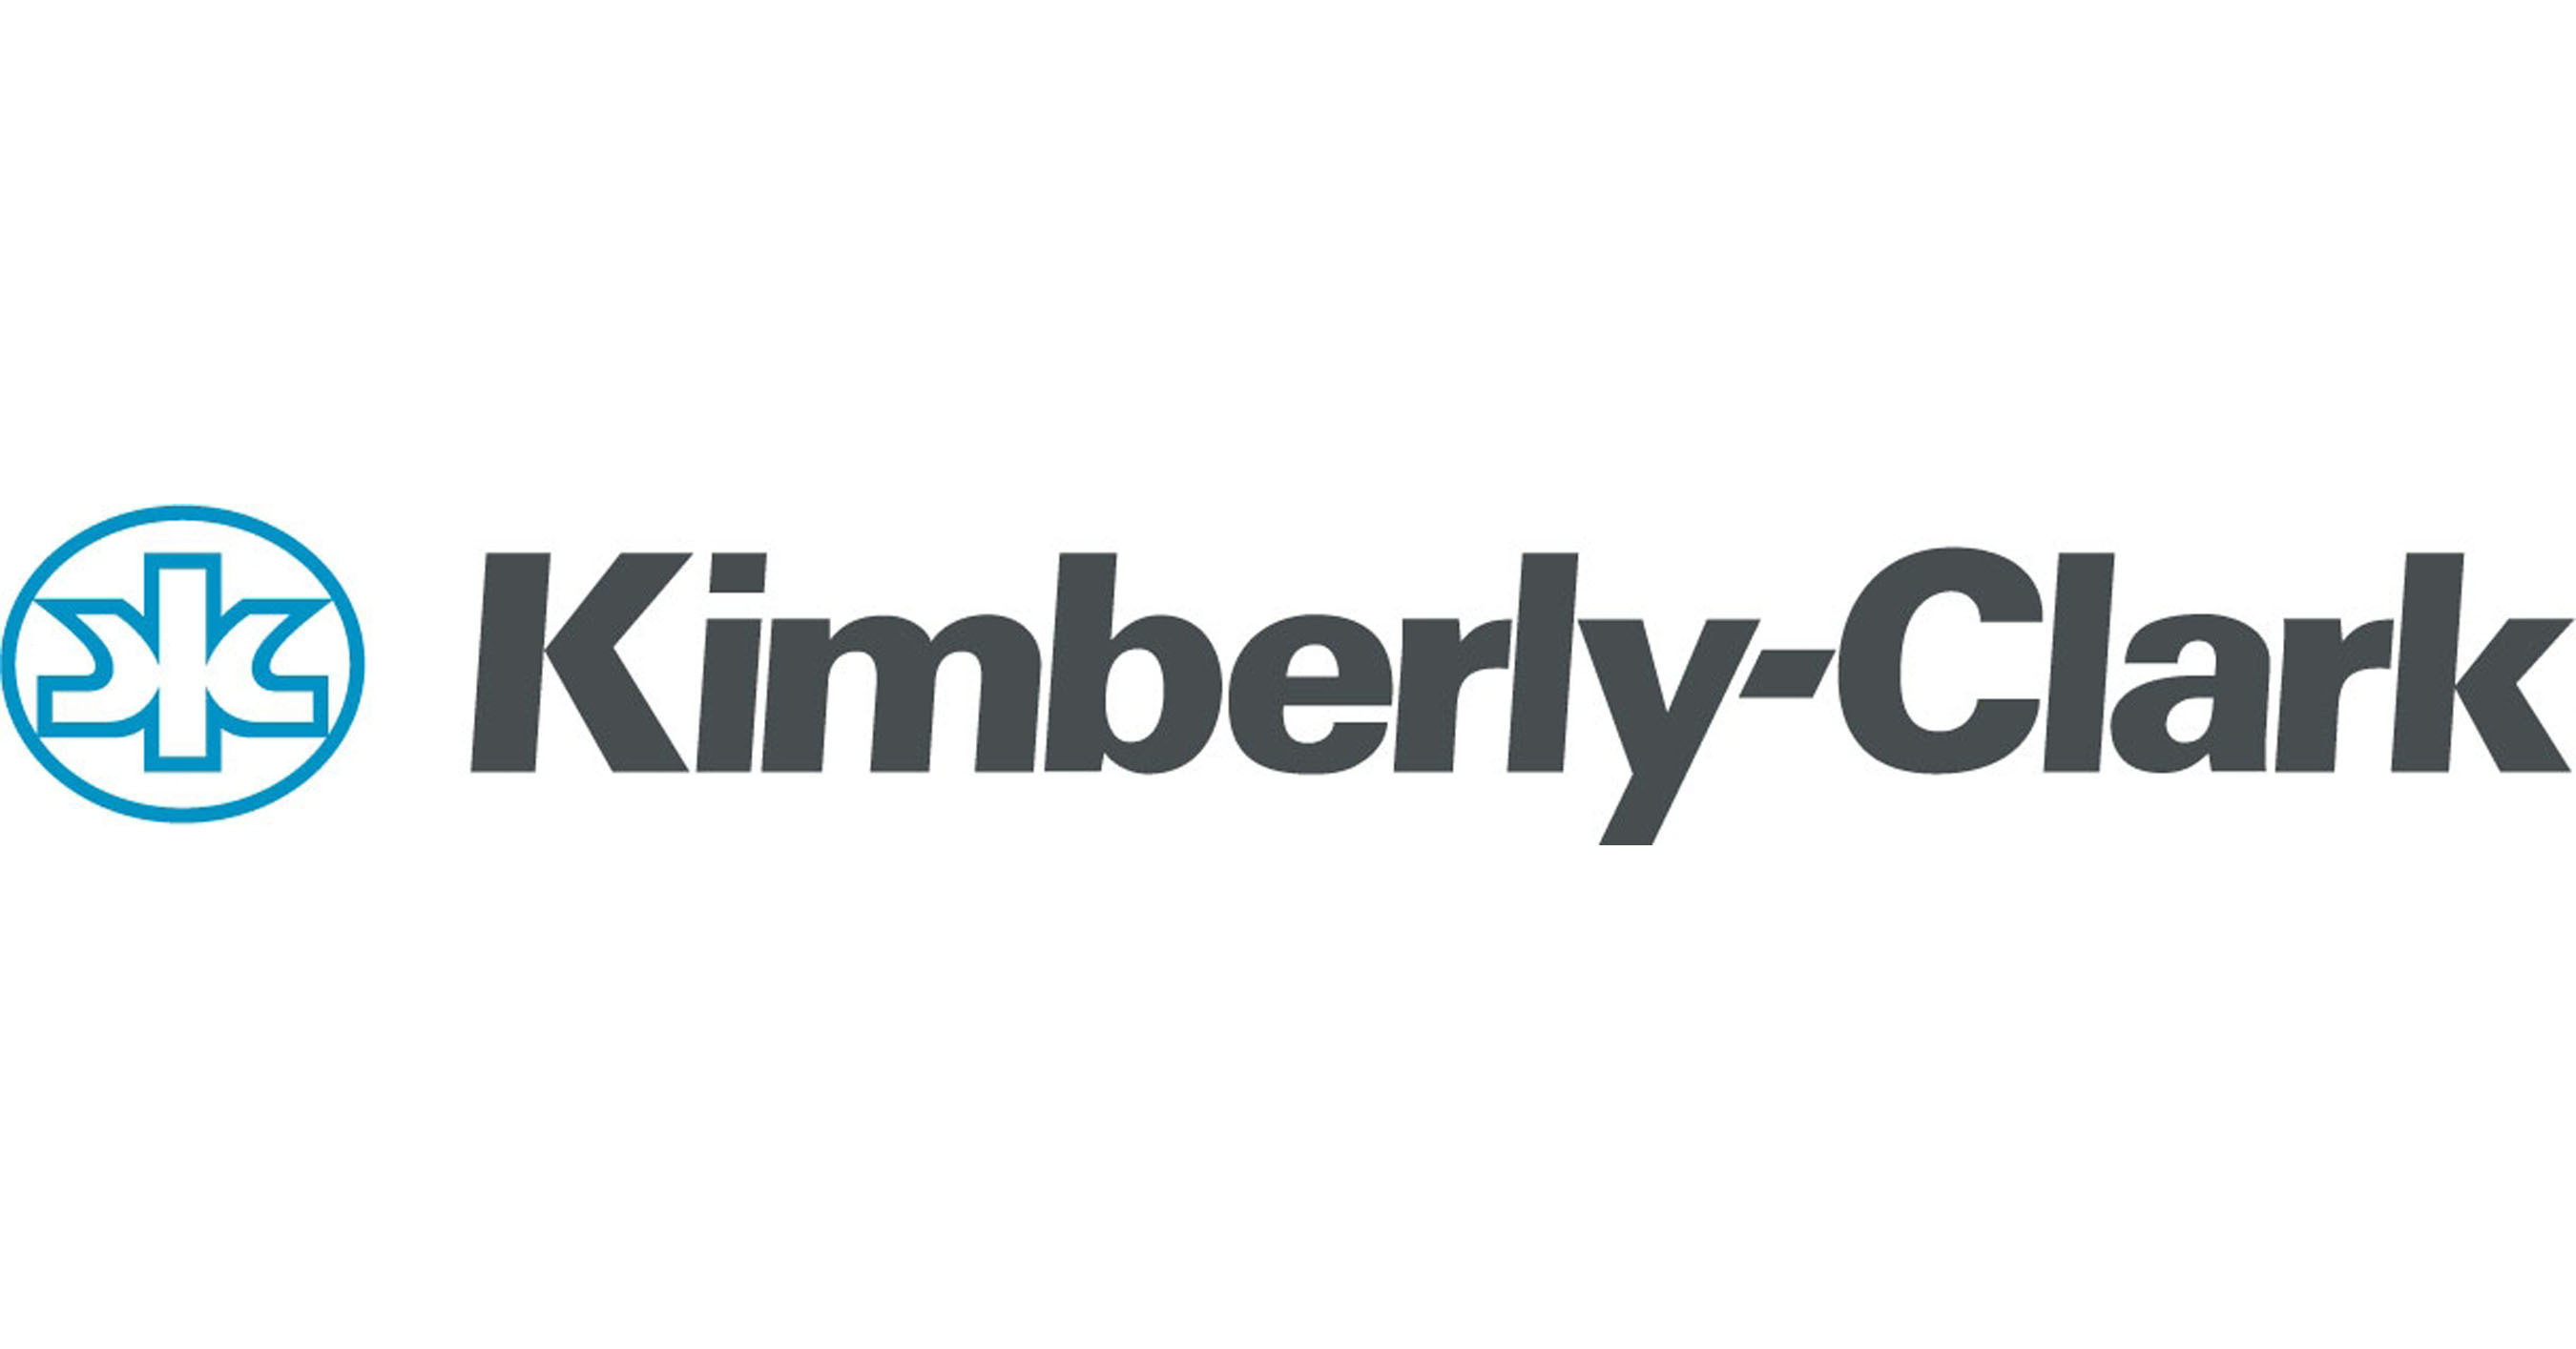 kimberly-clark-trade-unions-around-the-world-angry-with-mass-job-cuts-announcement-industriall